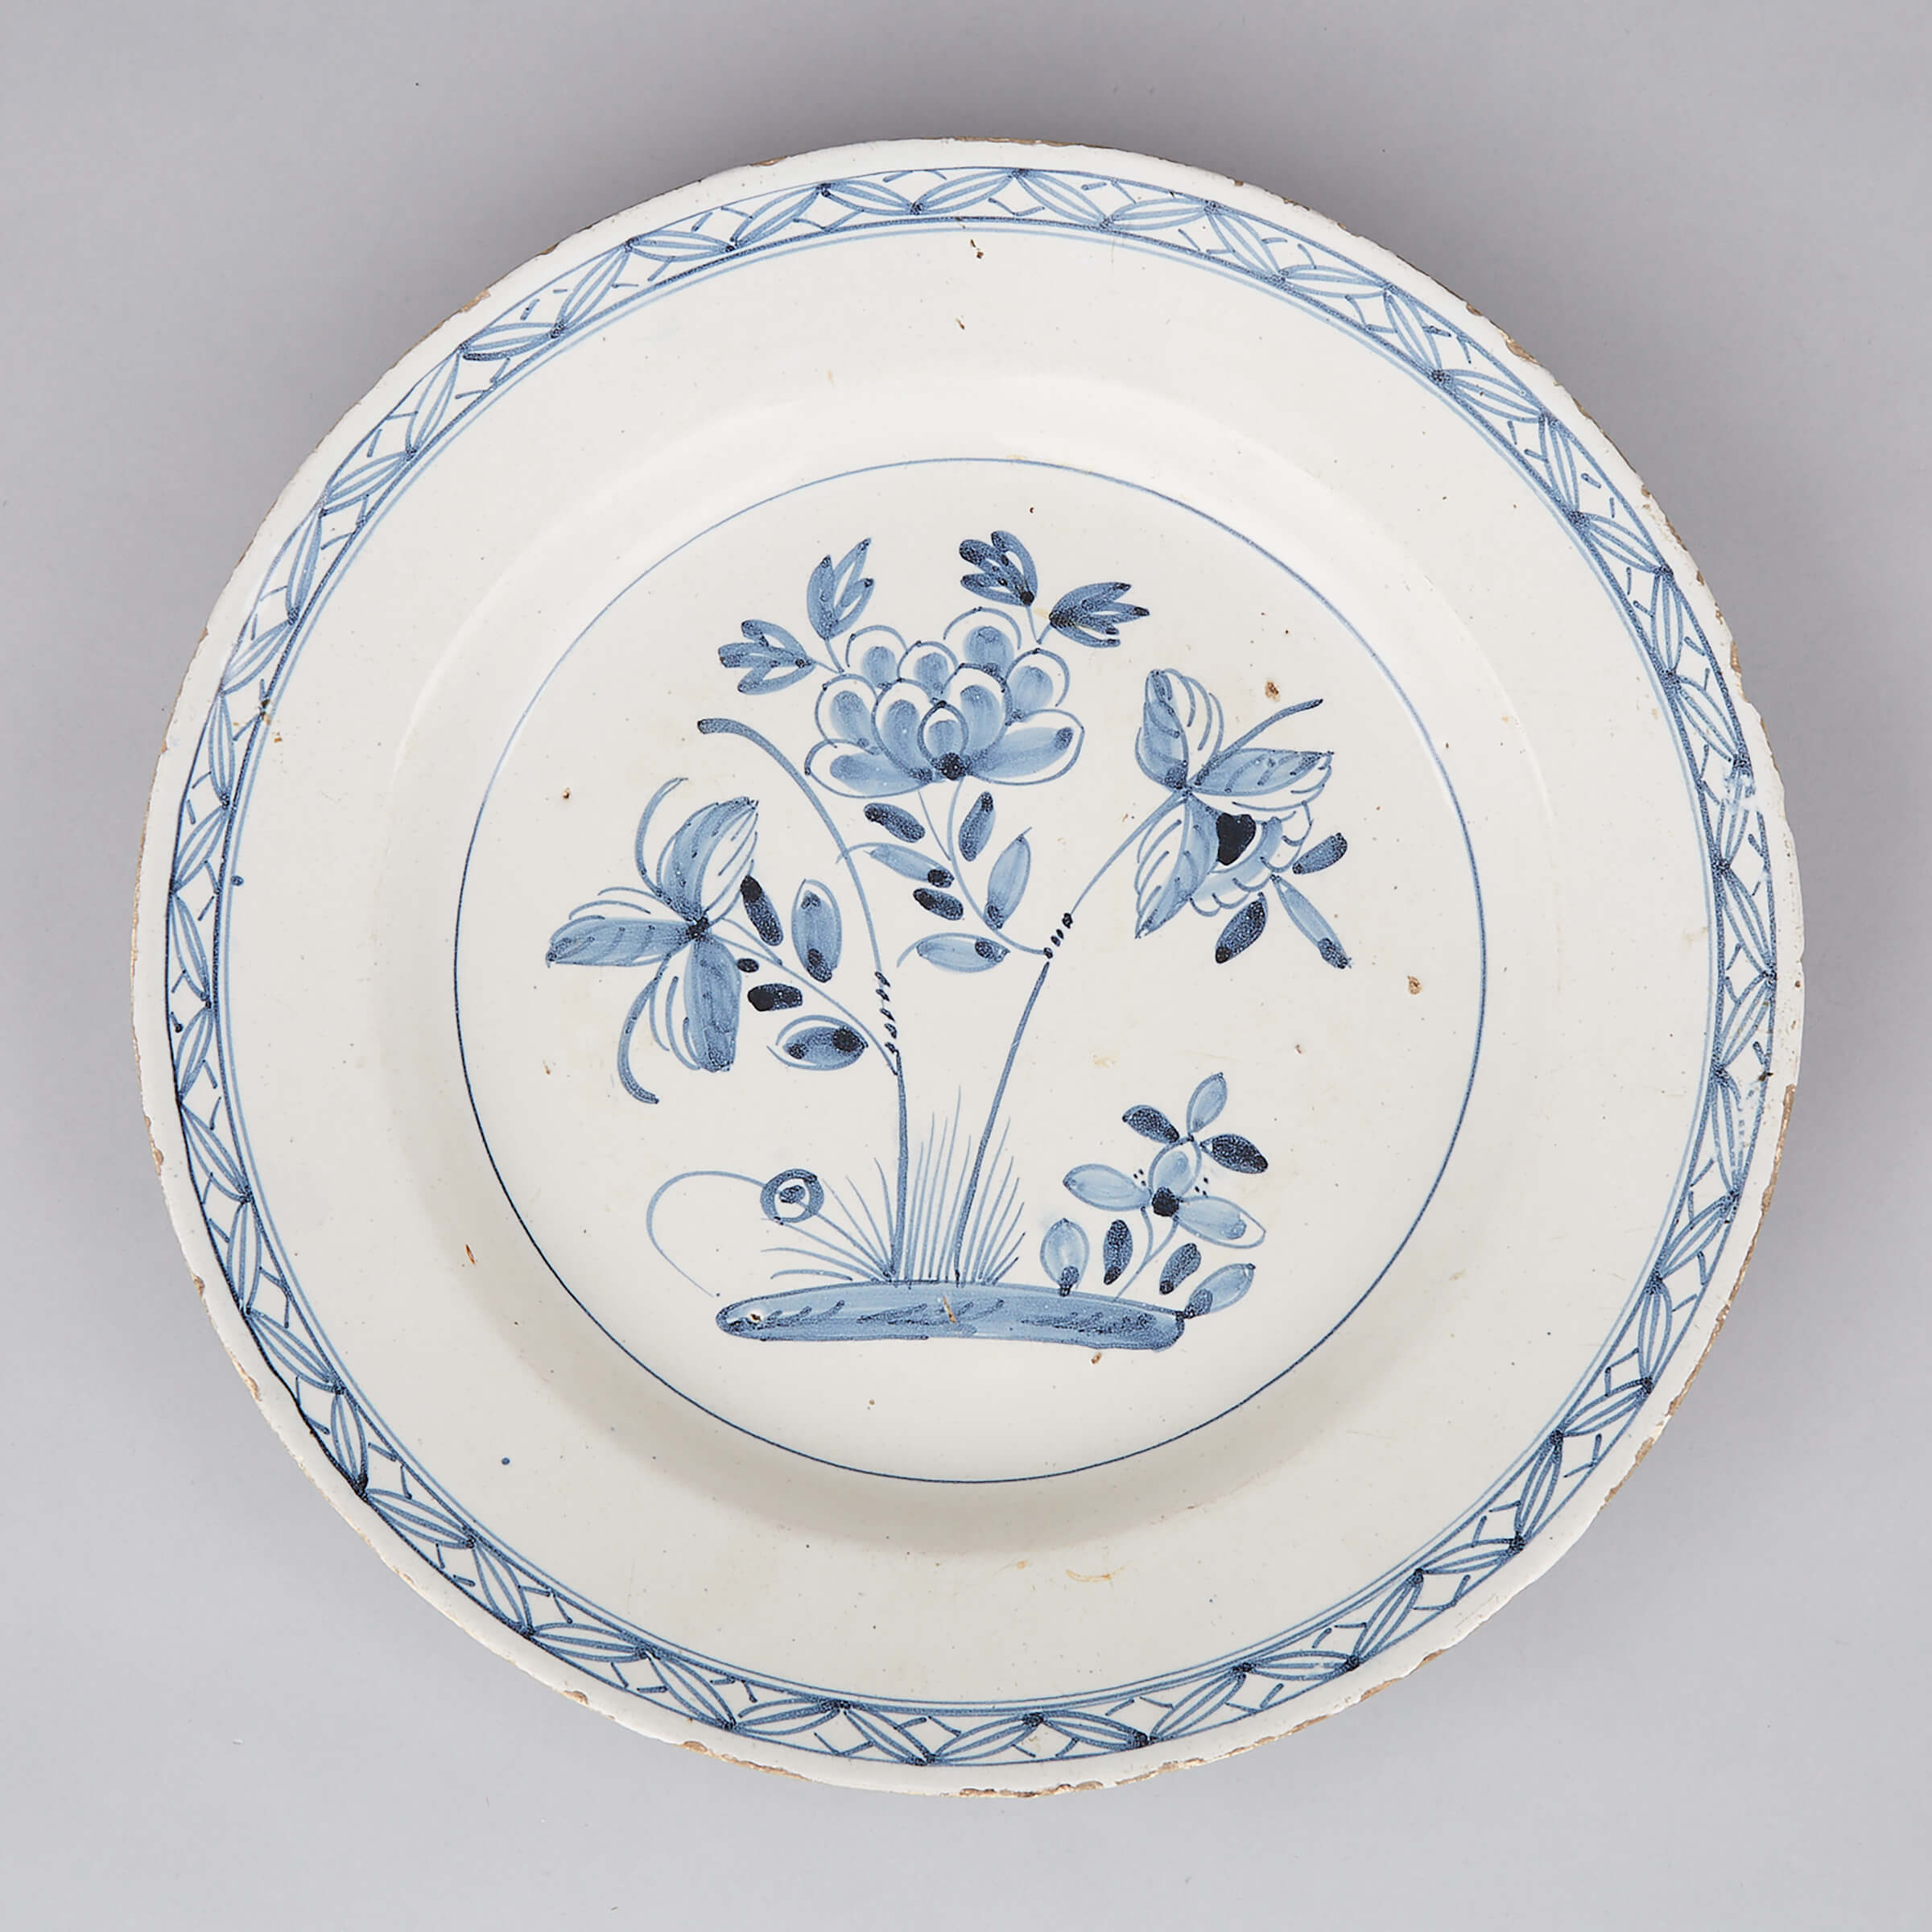 Large Delft Charger, probably English, 18th century